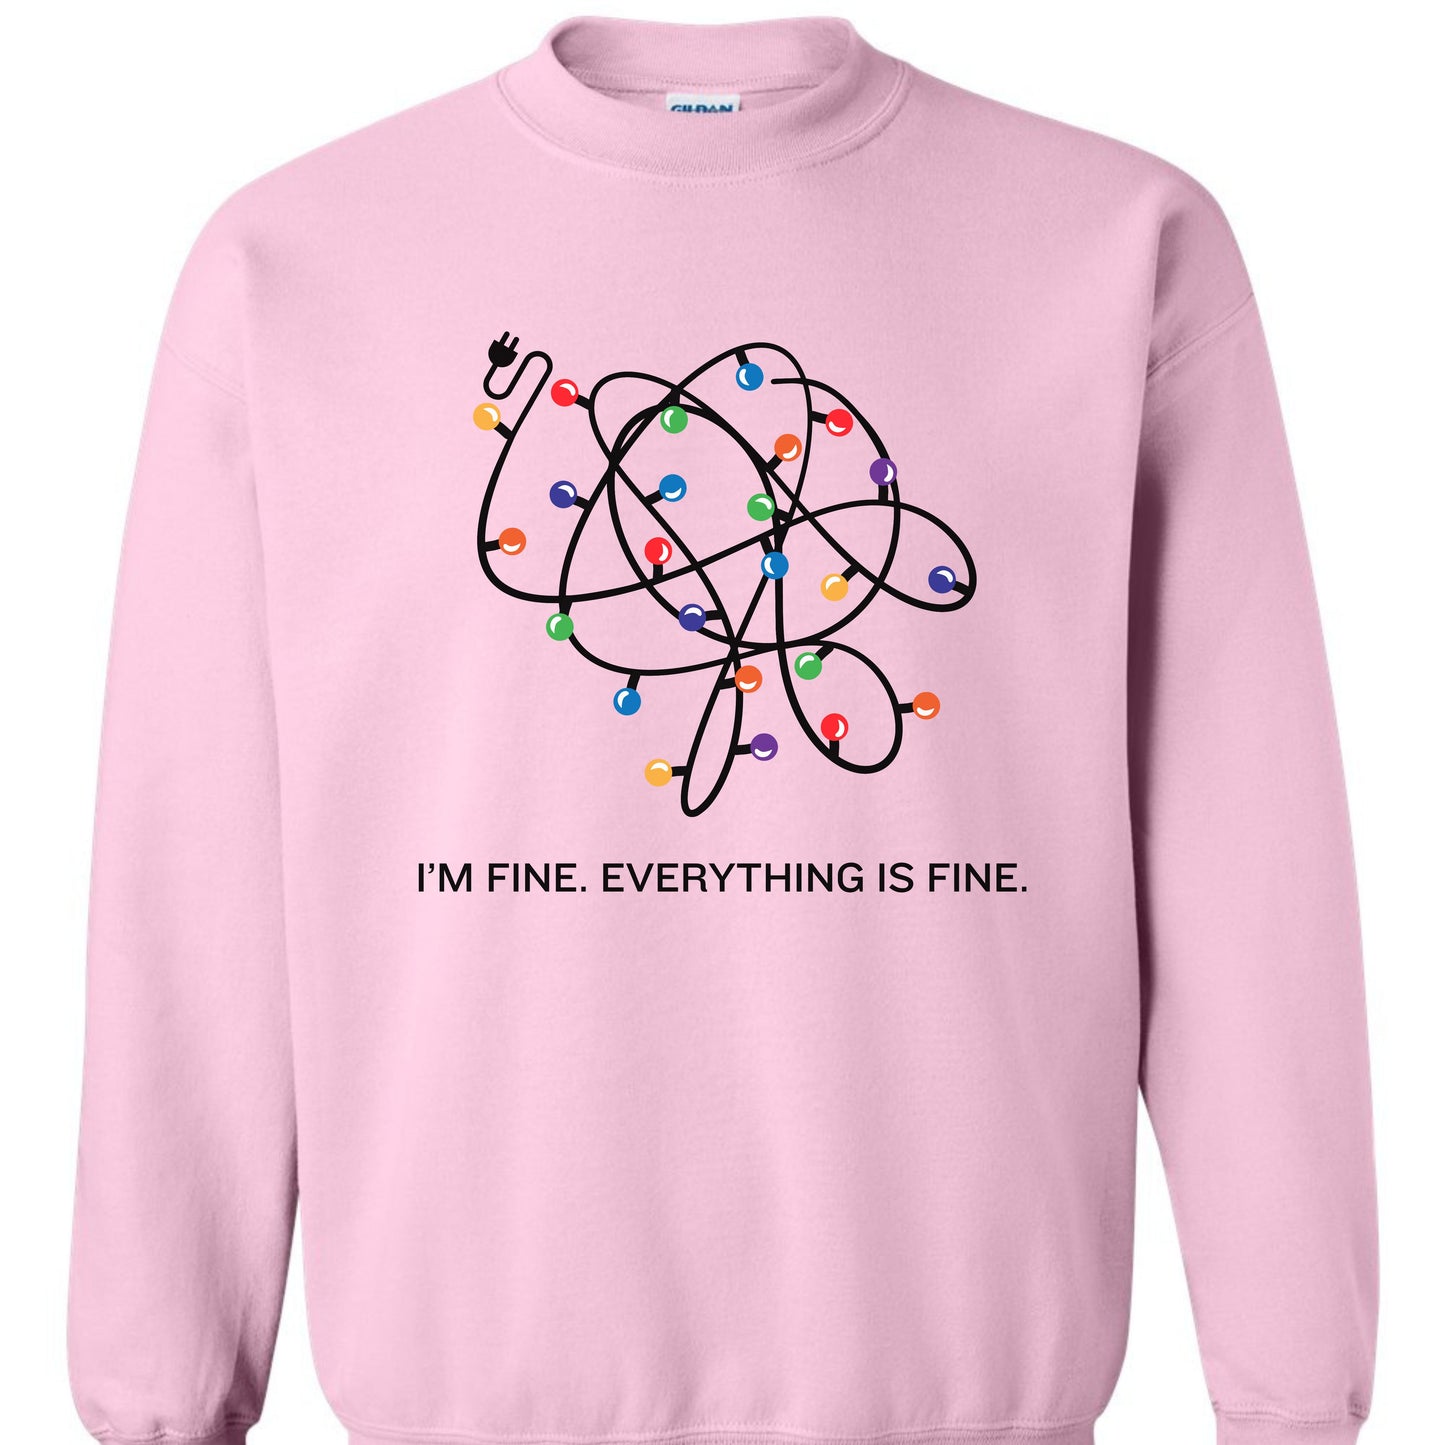 I'm fine, everything is fine Christmas Sweater